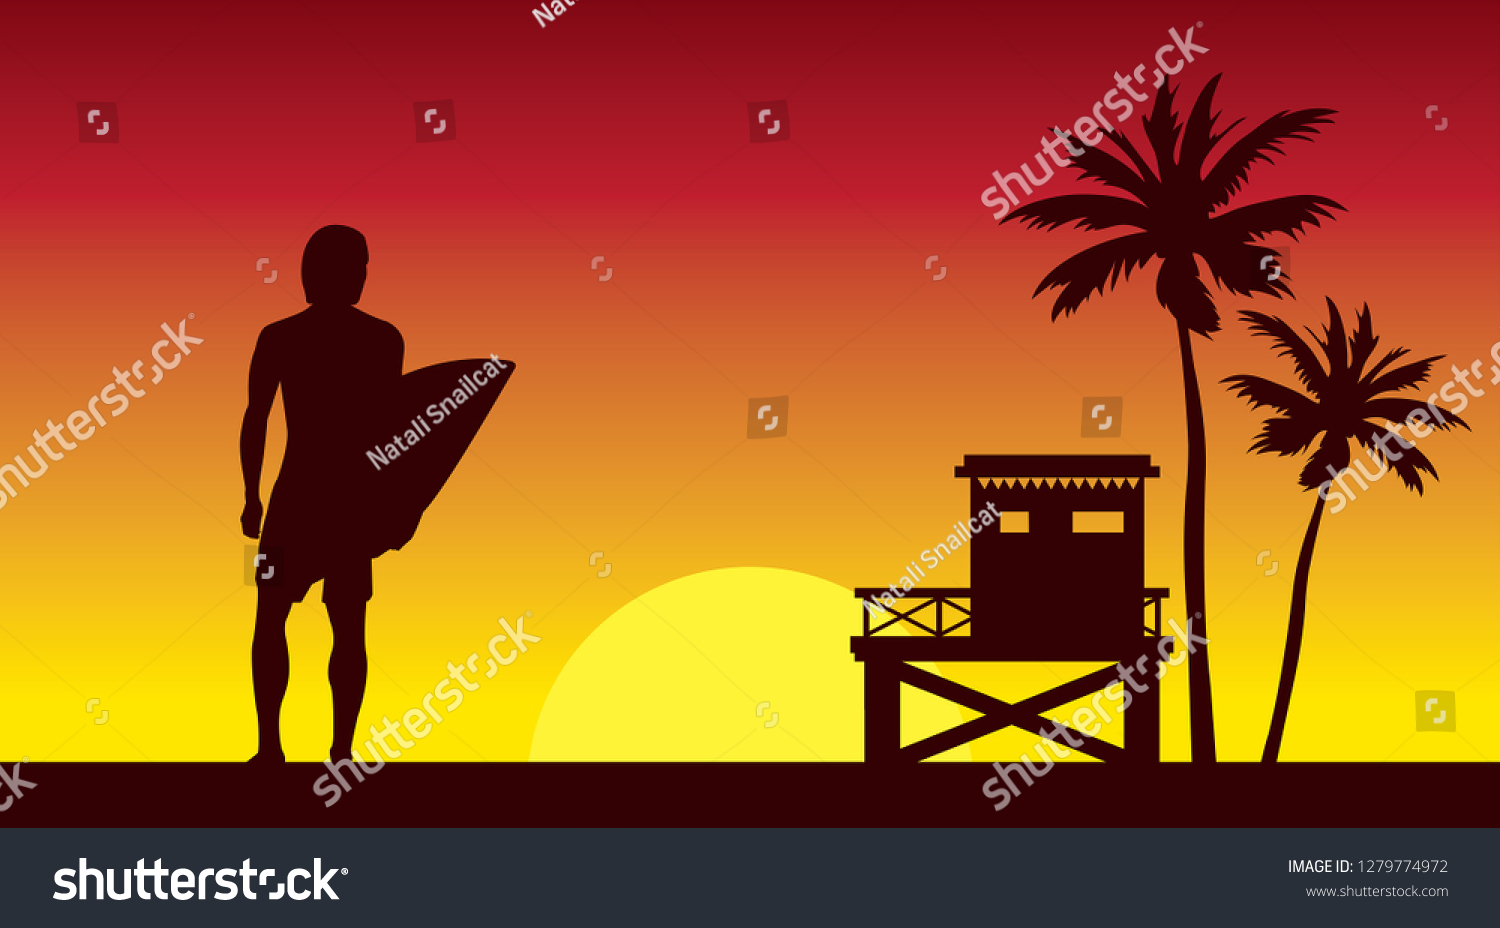 SVG of Silhouette of surfer, lifeguard station and palm tree on a red sunset sky. Summer nature vector illustration. Sport water card - surfing. svg